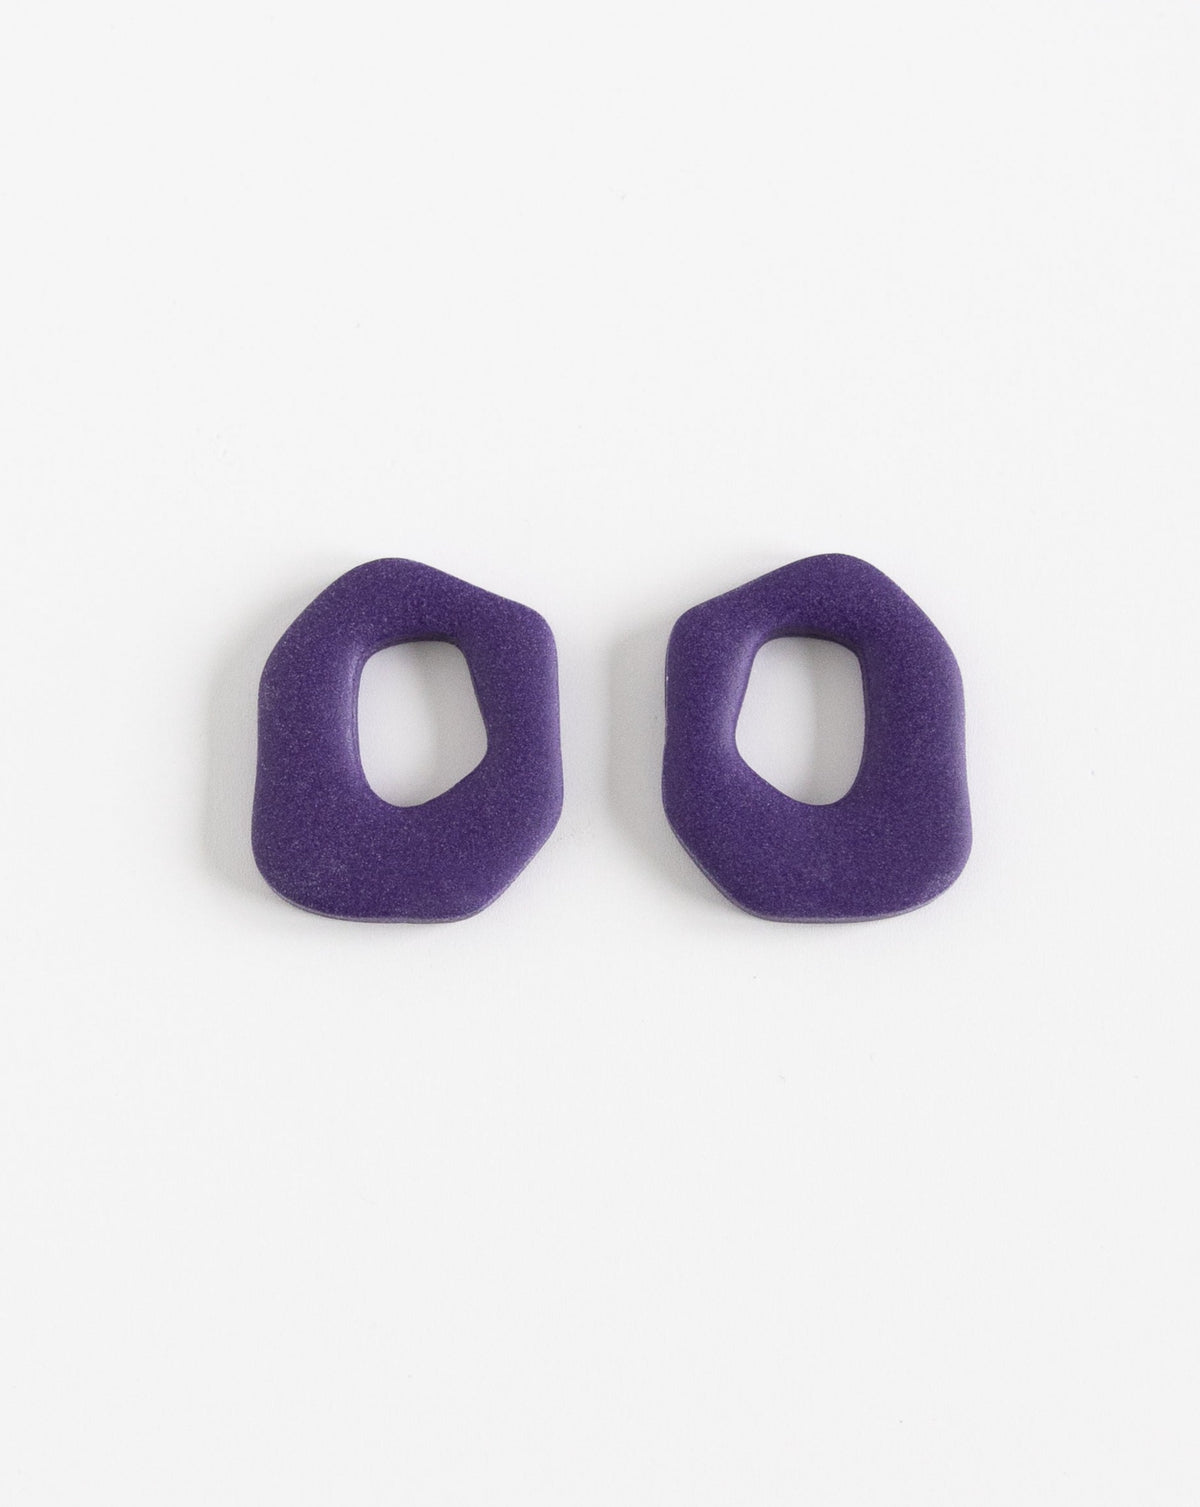 Darien Beads in Purple color, front view